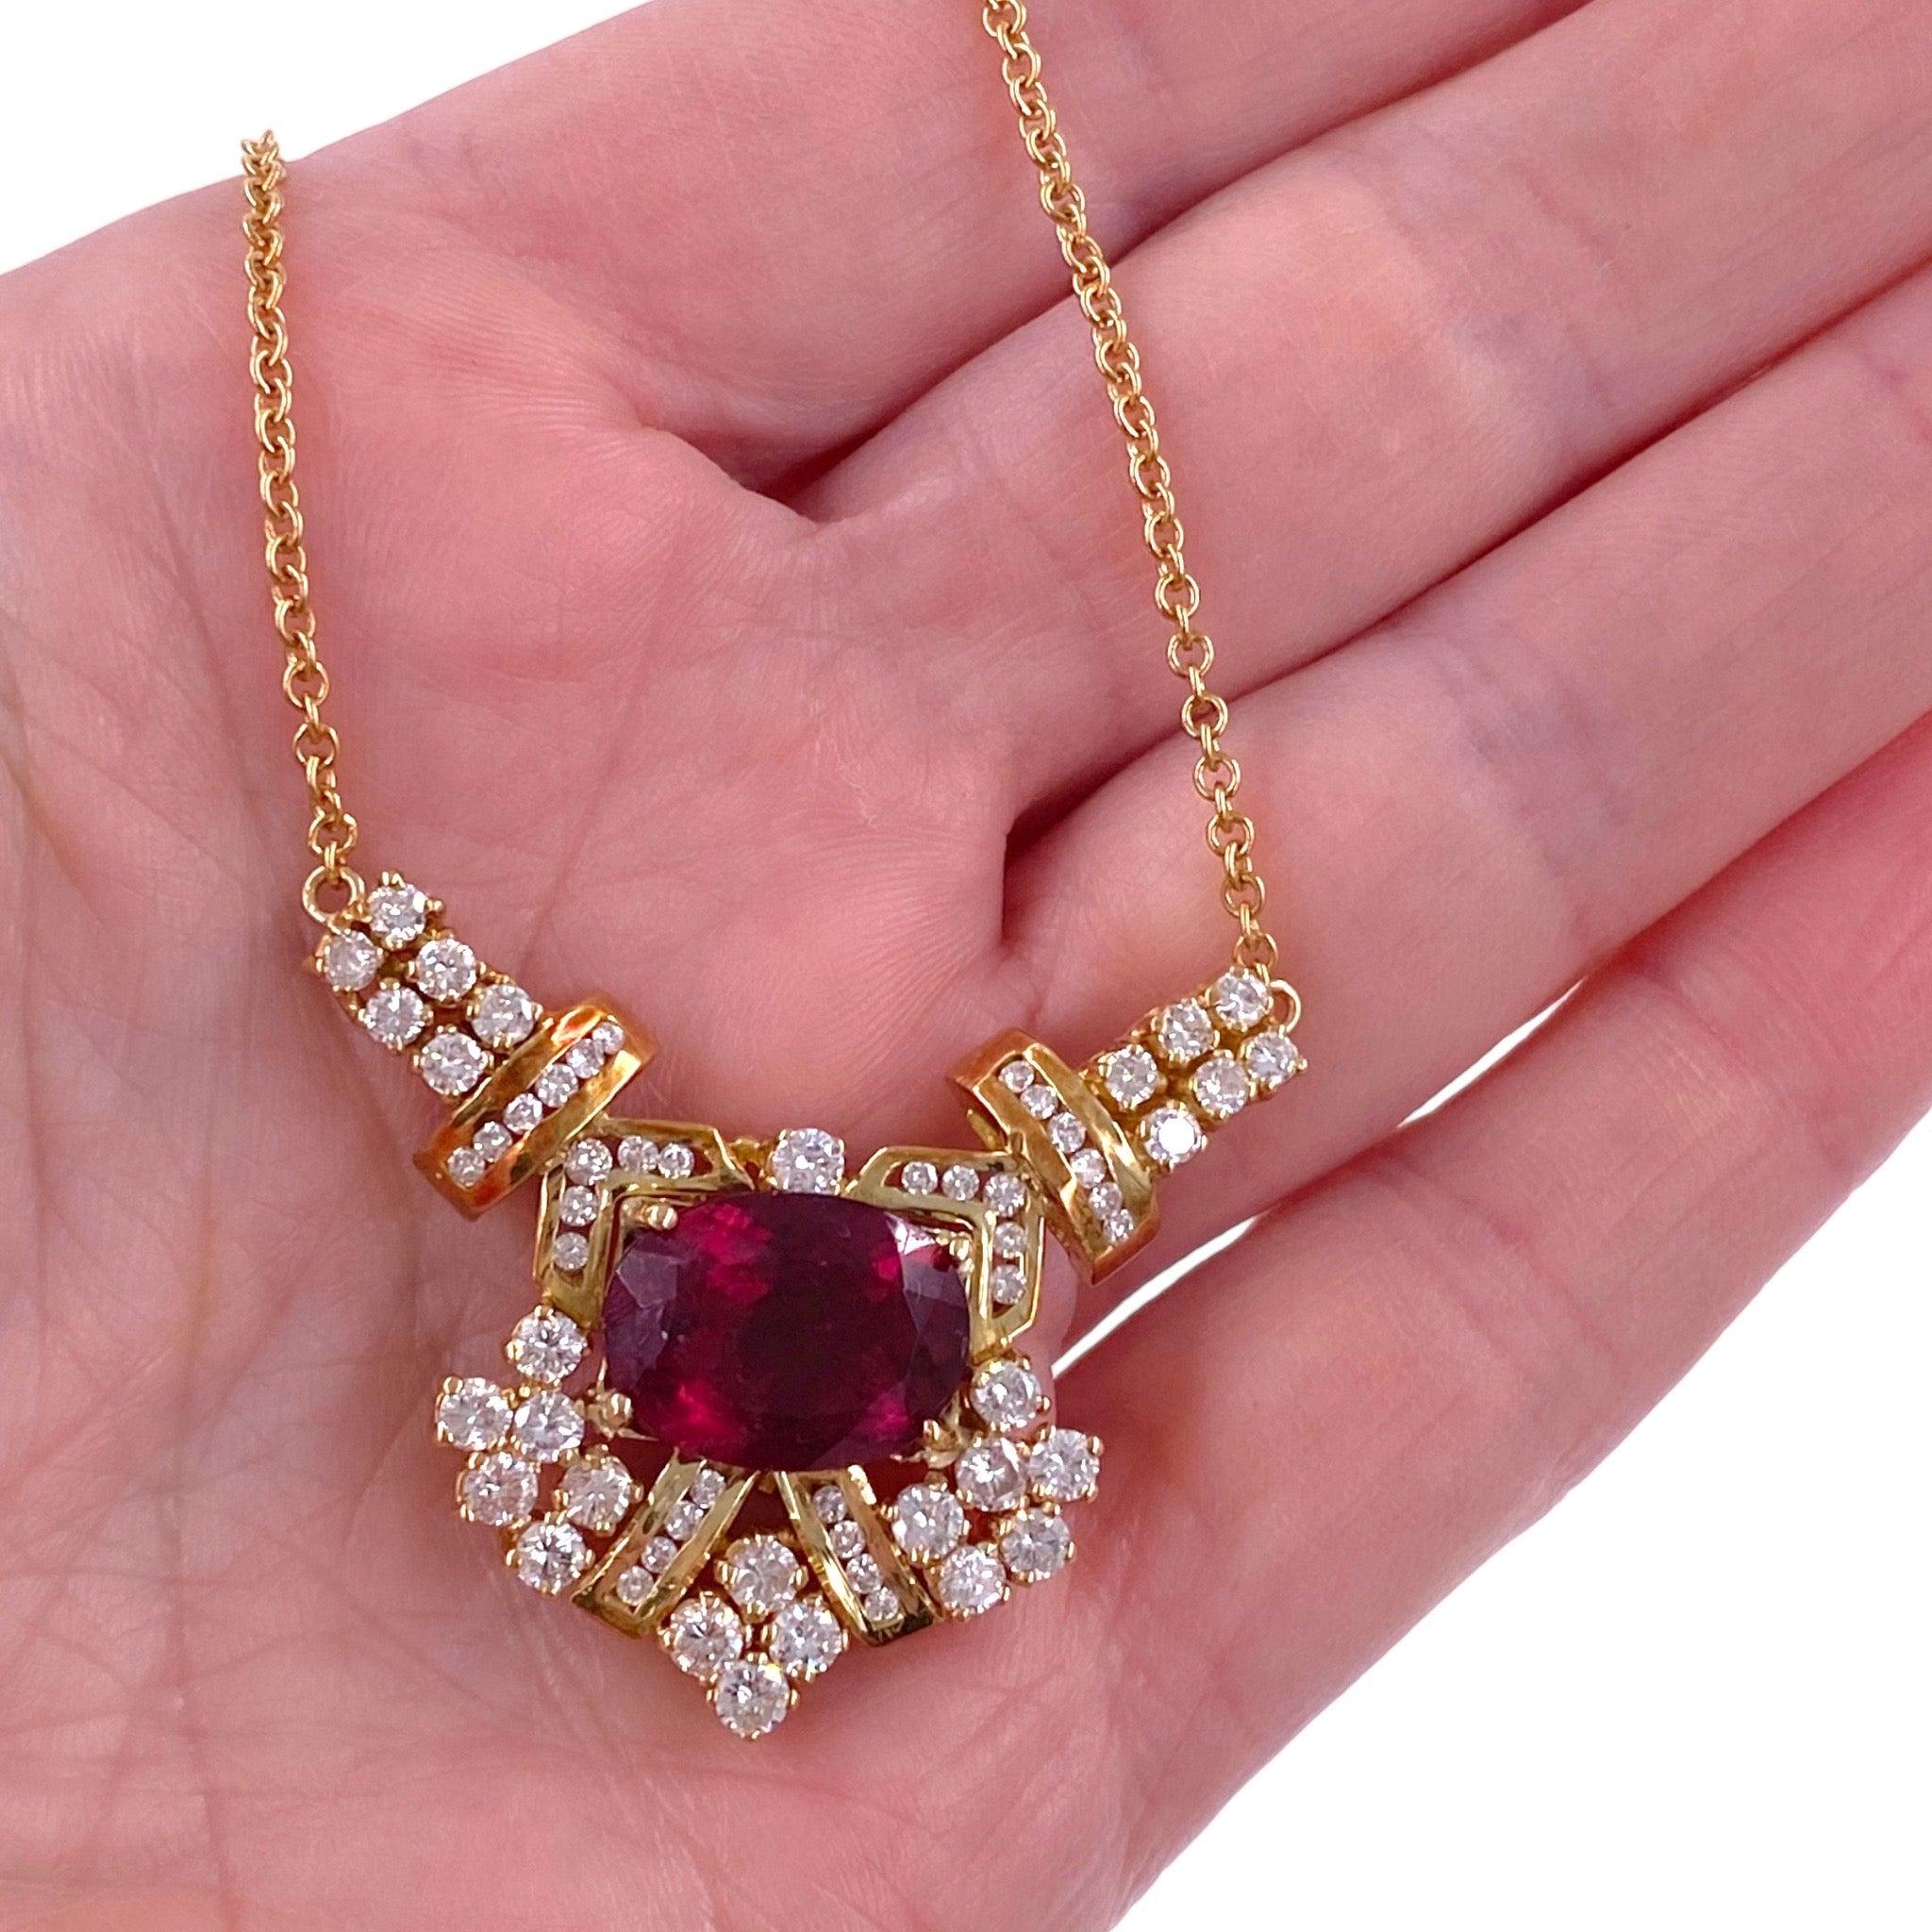 Vintage 18K Gold Rubellite Tourmaline & Diamond Necklace In Good Condition For Sale In Henderson, NV